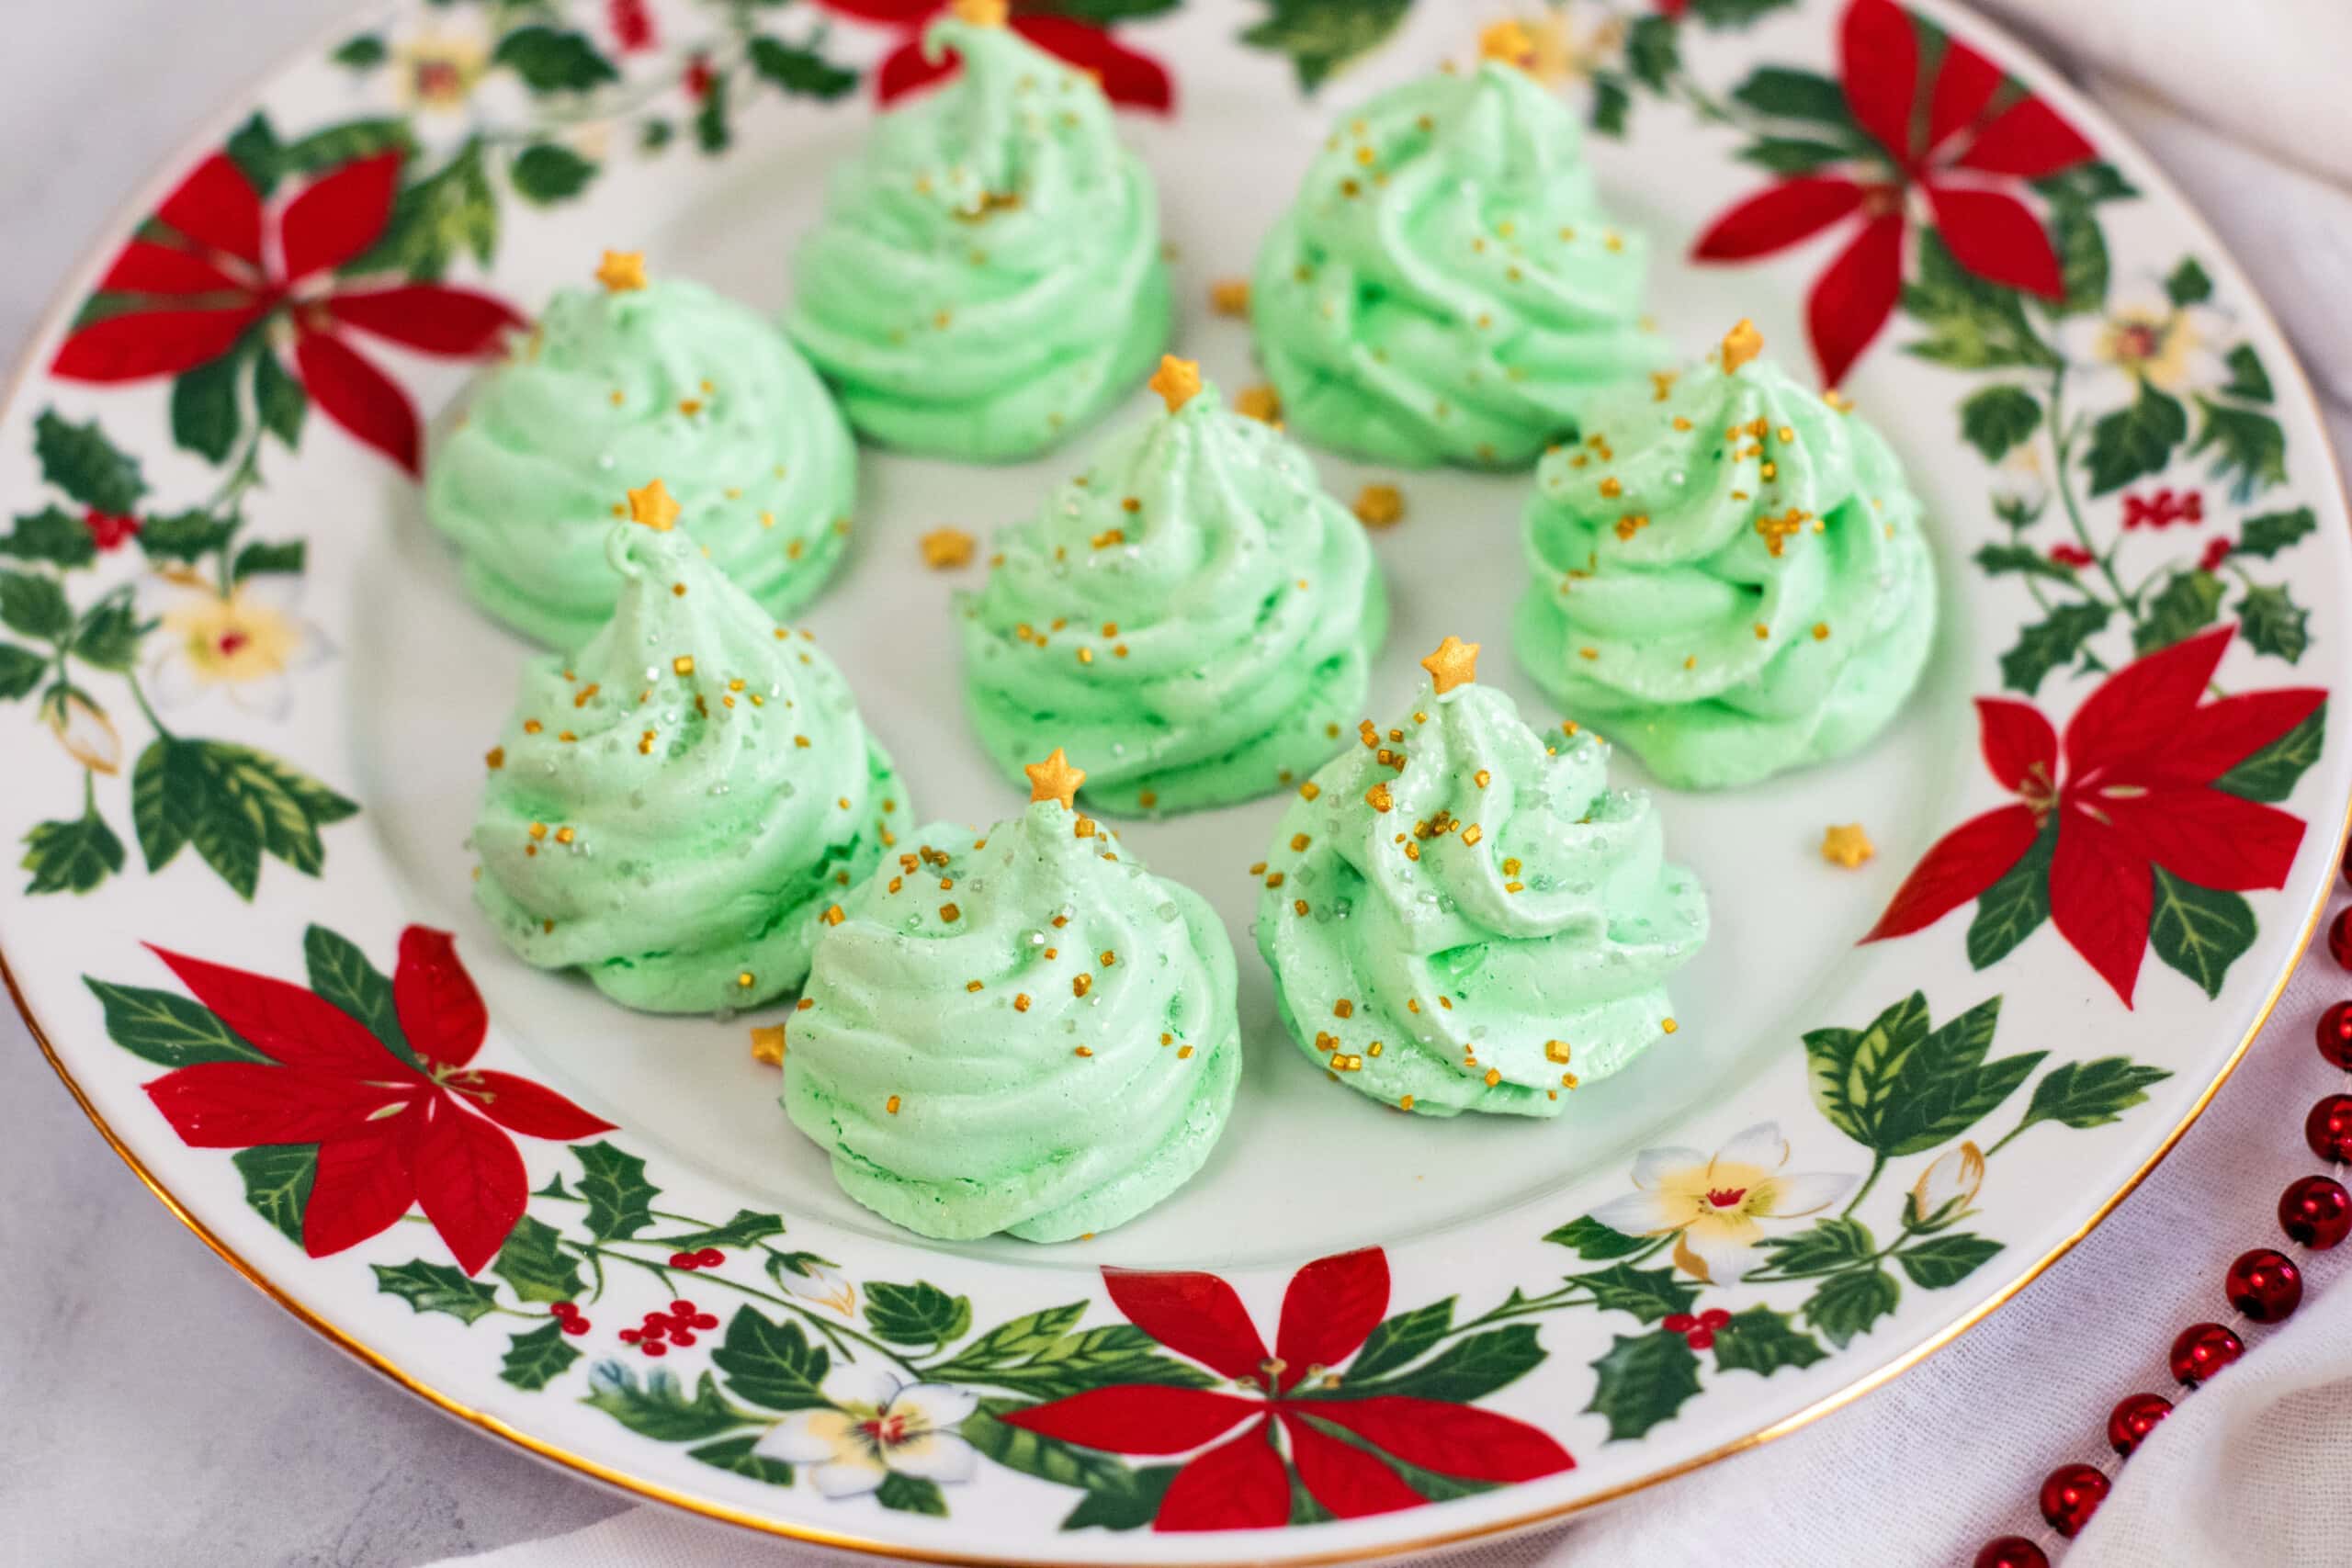 Christmas meringues on holiday plate